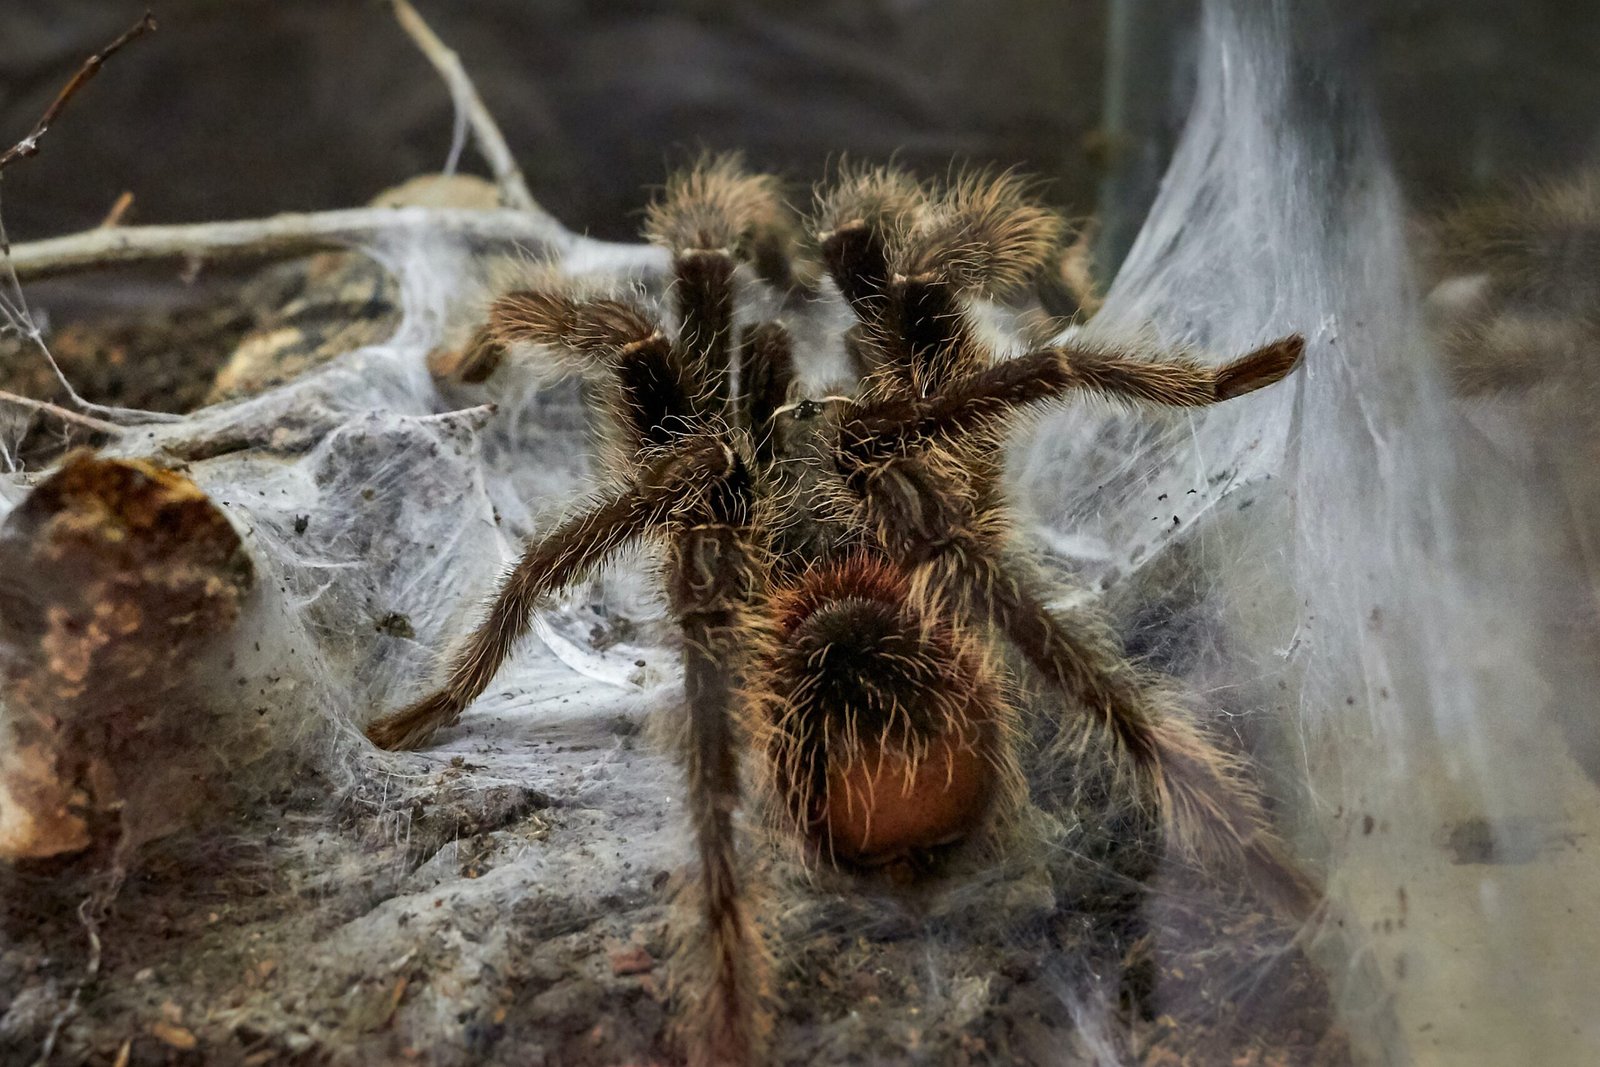 How Do You Create A Suitable Environment For The Brazilian Wandering Spider In Captivity?